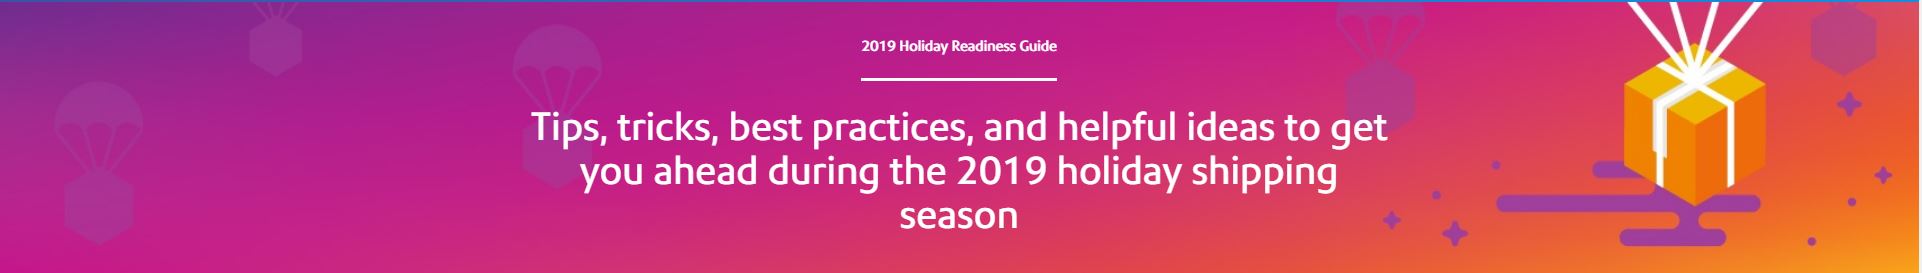 Pitney Bowes Holiday Readiness Guide